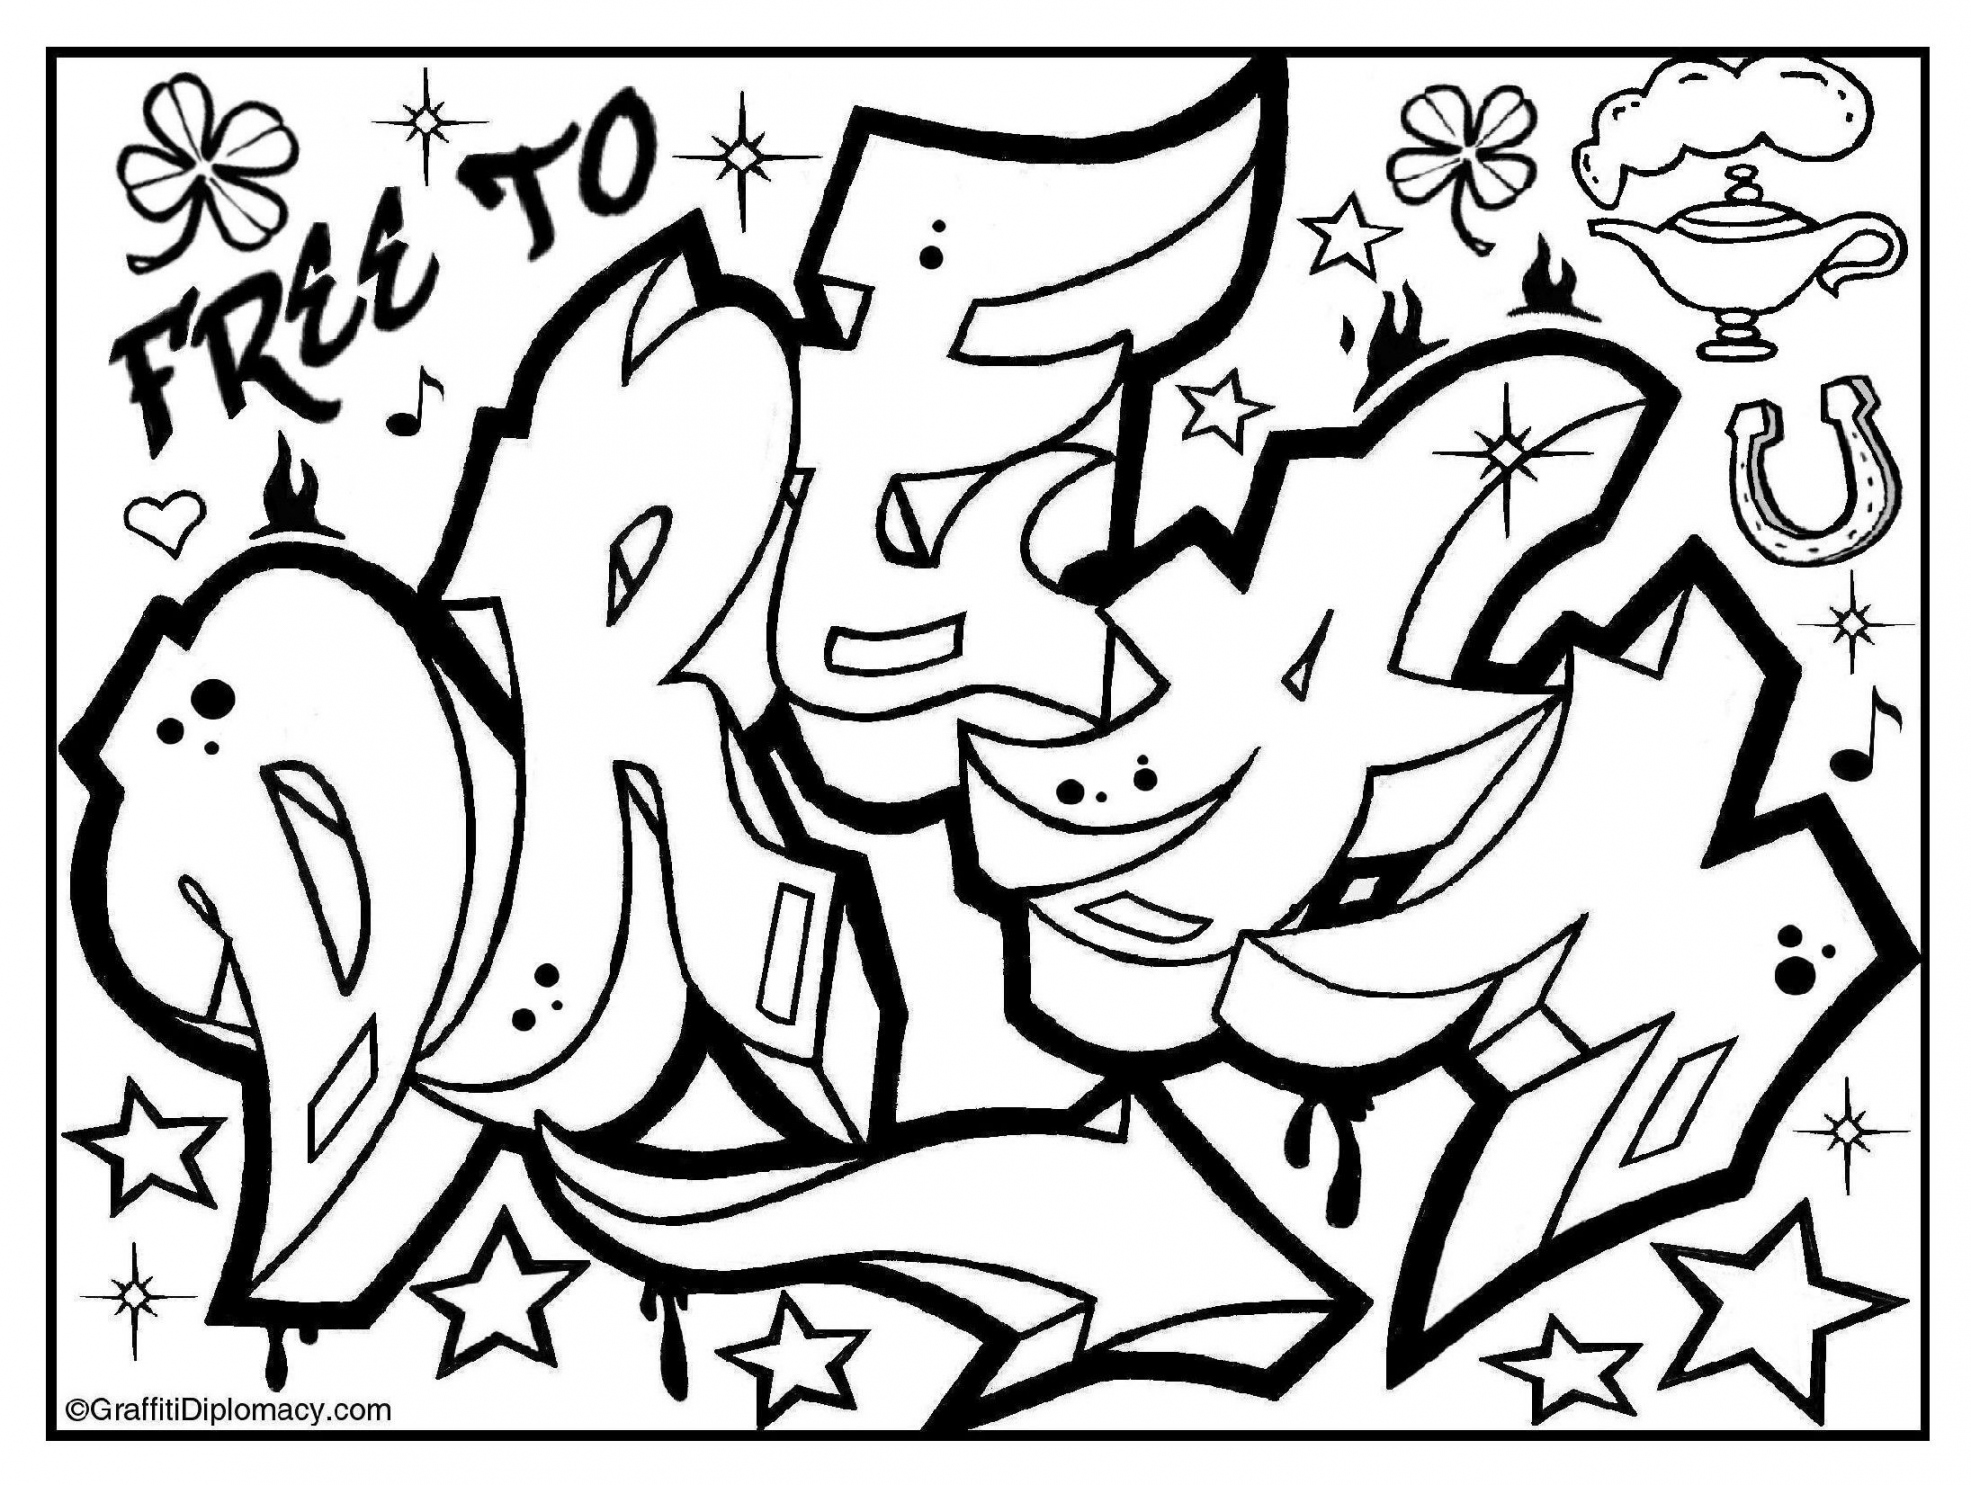 Pin on Coloring Pages - FREE Printables - Free Printable Street Art Graffiti Coloring Pages